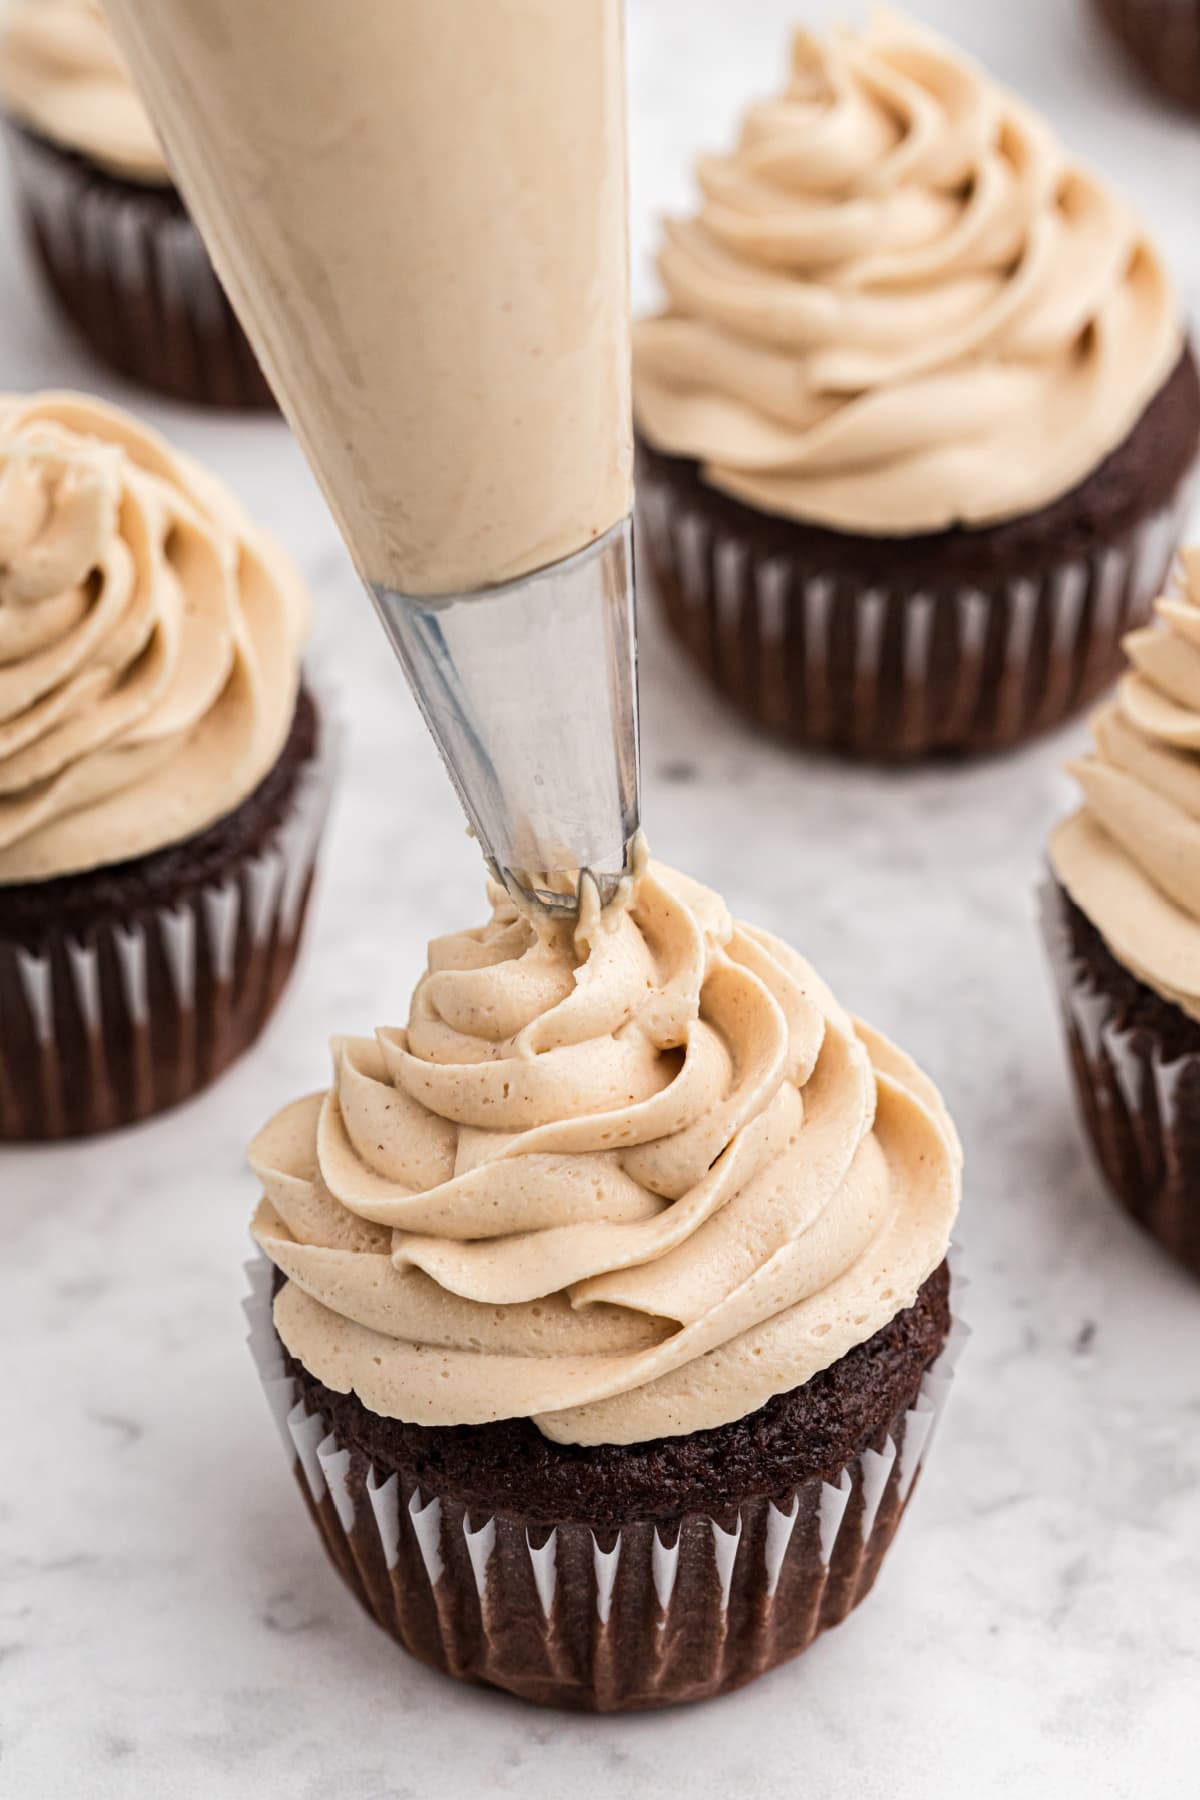 Piping peanut butter frosting on a chocolate cupcake